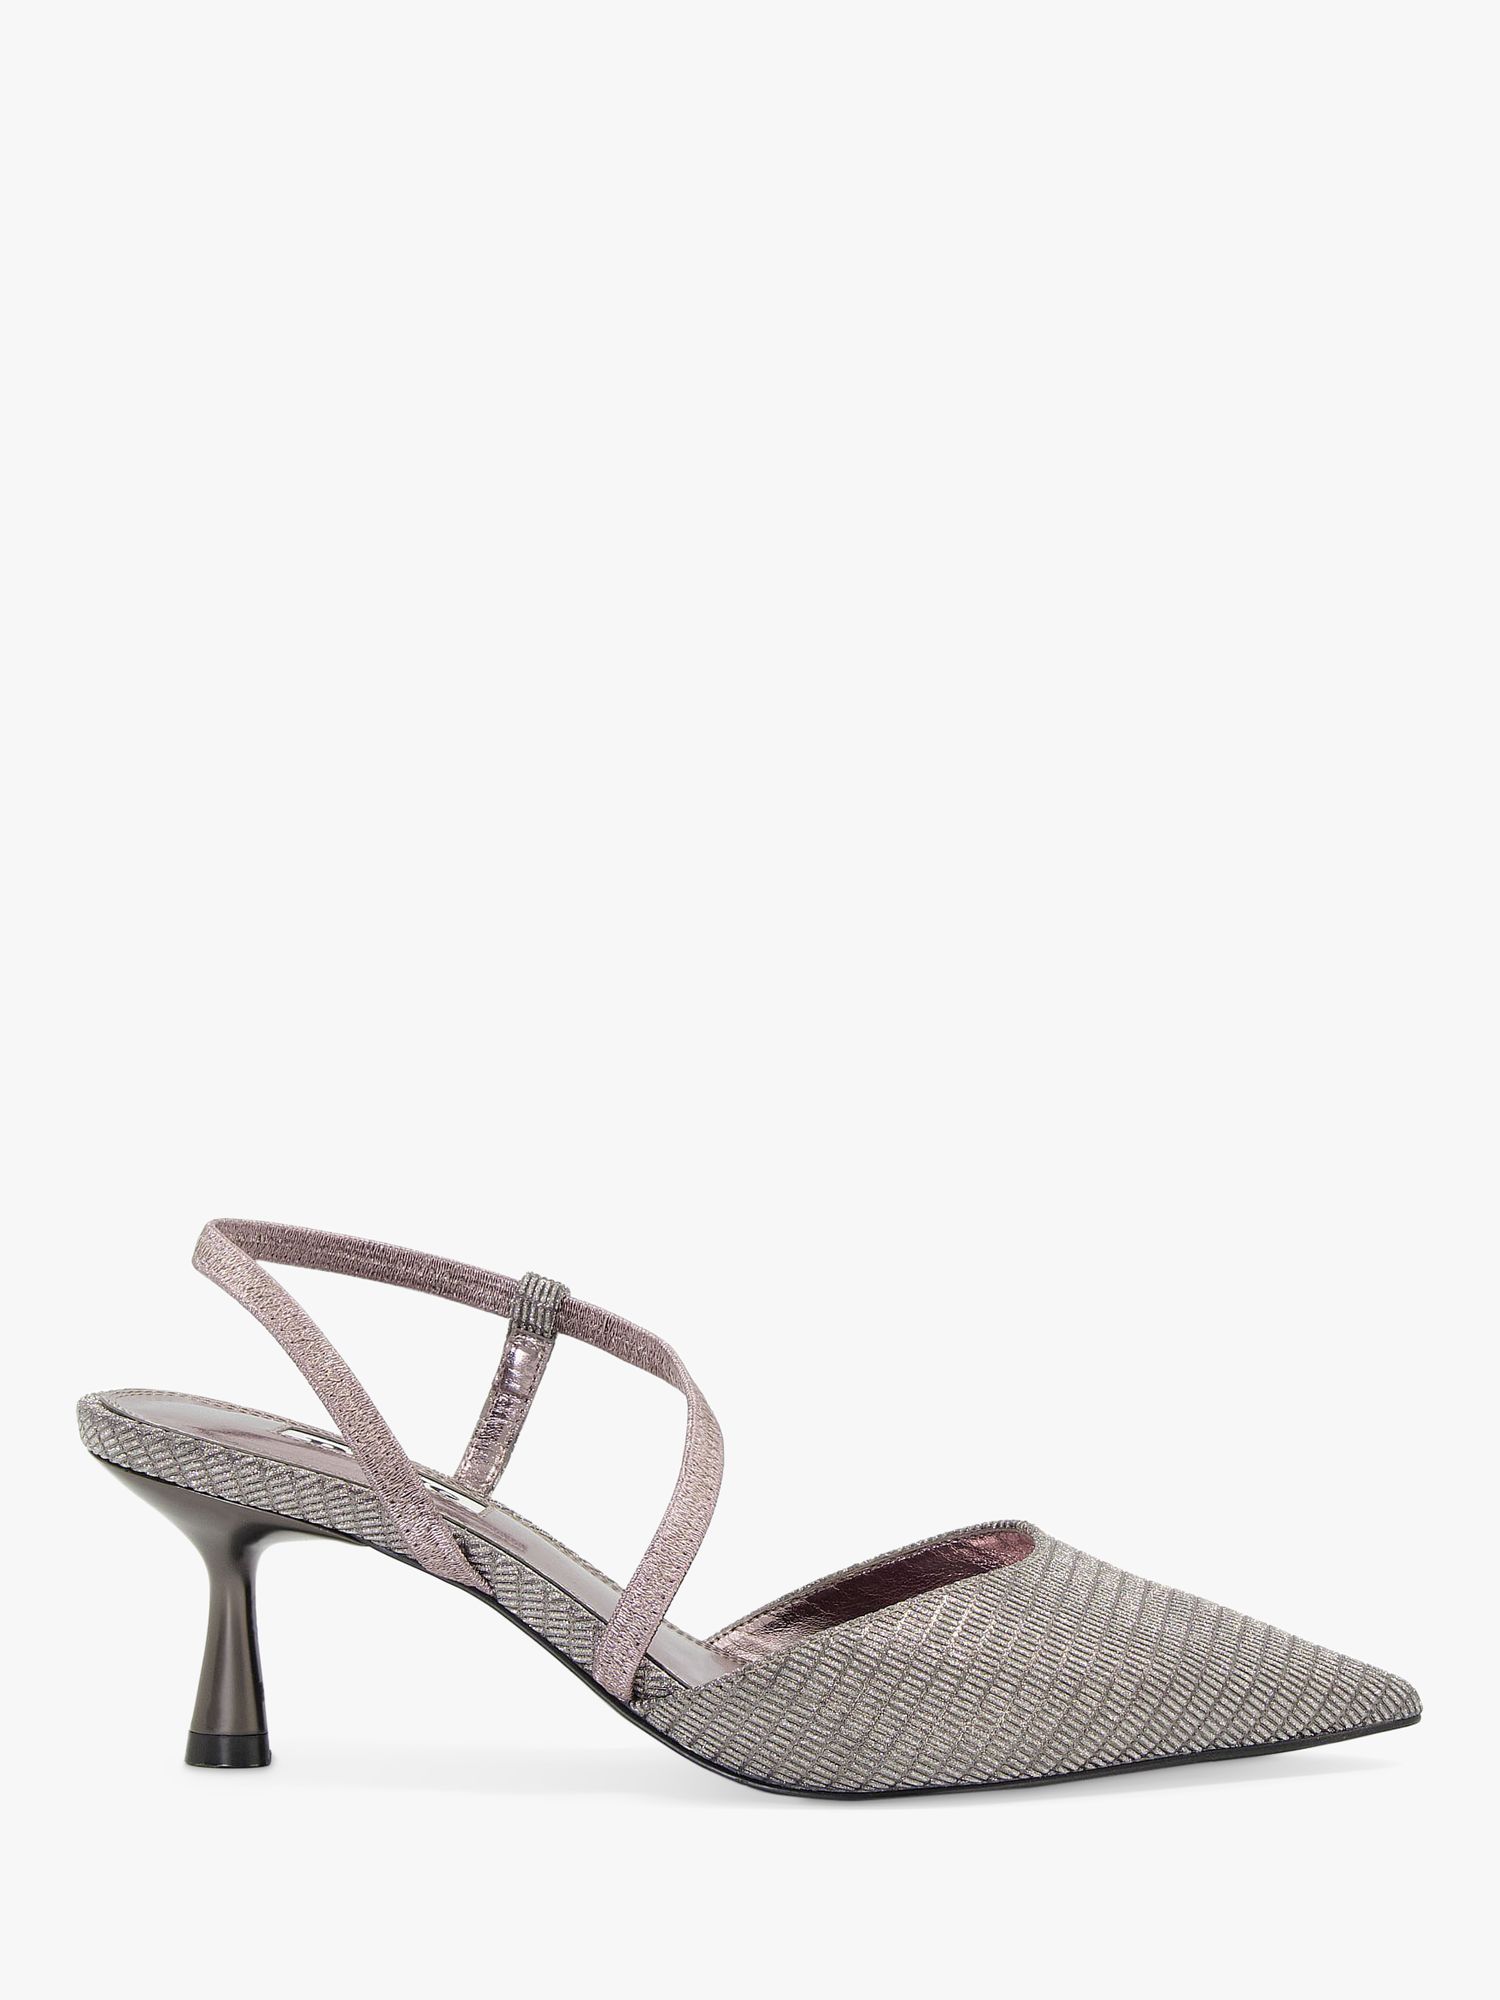 Dune Citrus Pointed Toe Court Shoes, Pewter at John Lewis & Partners